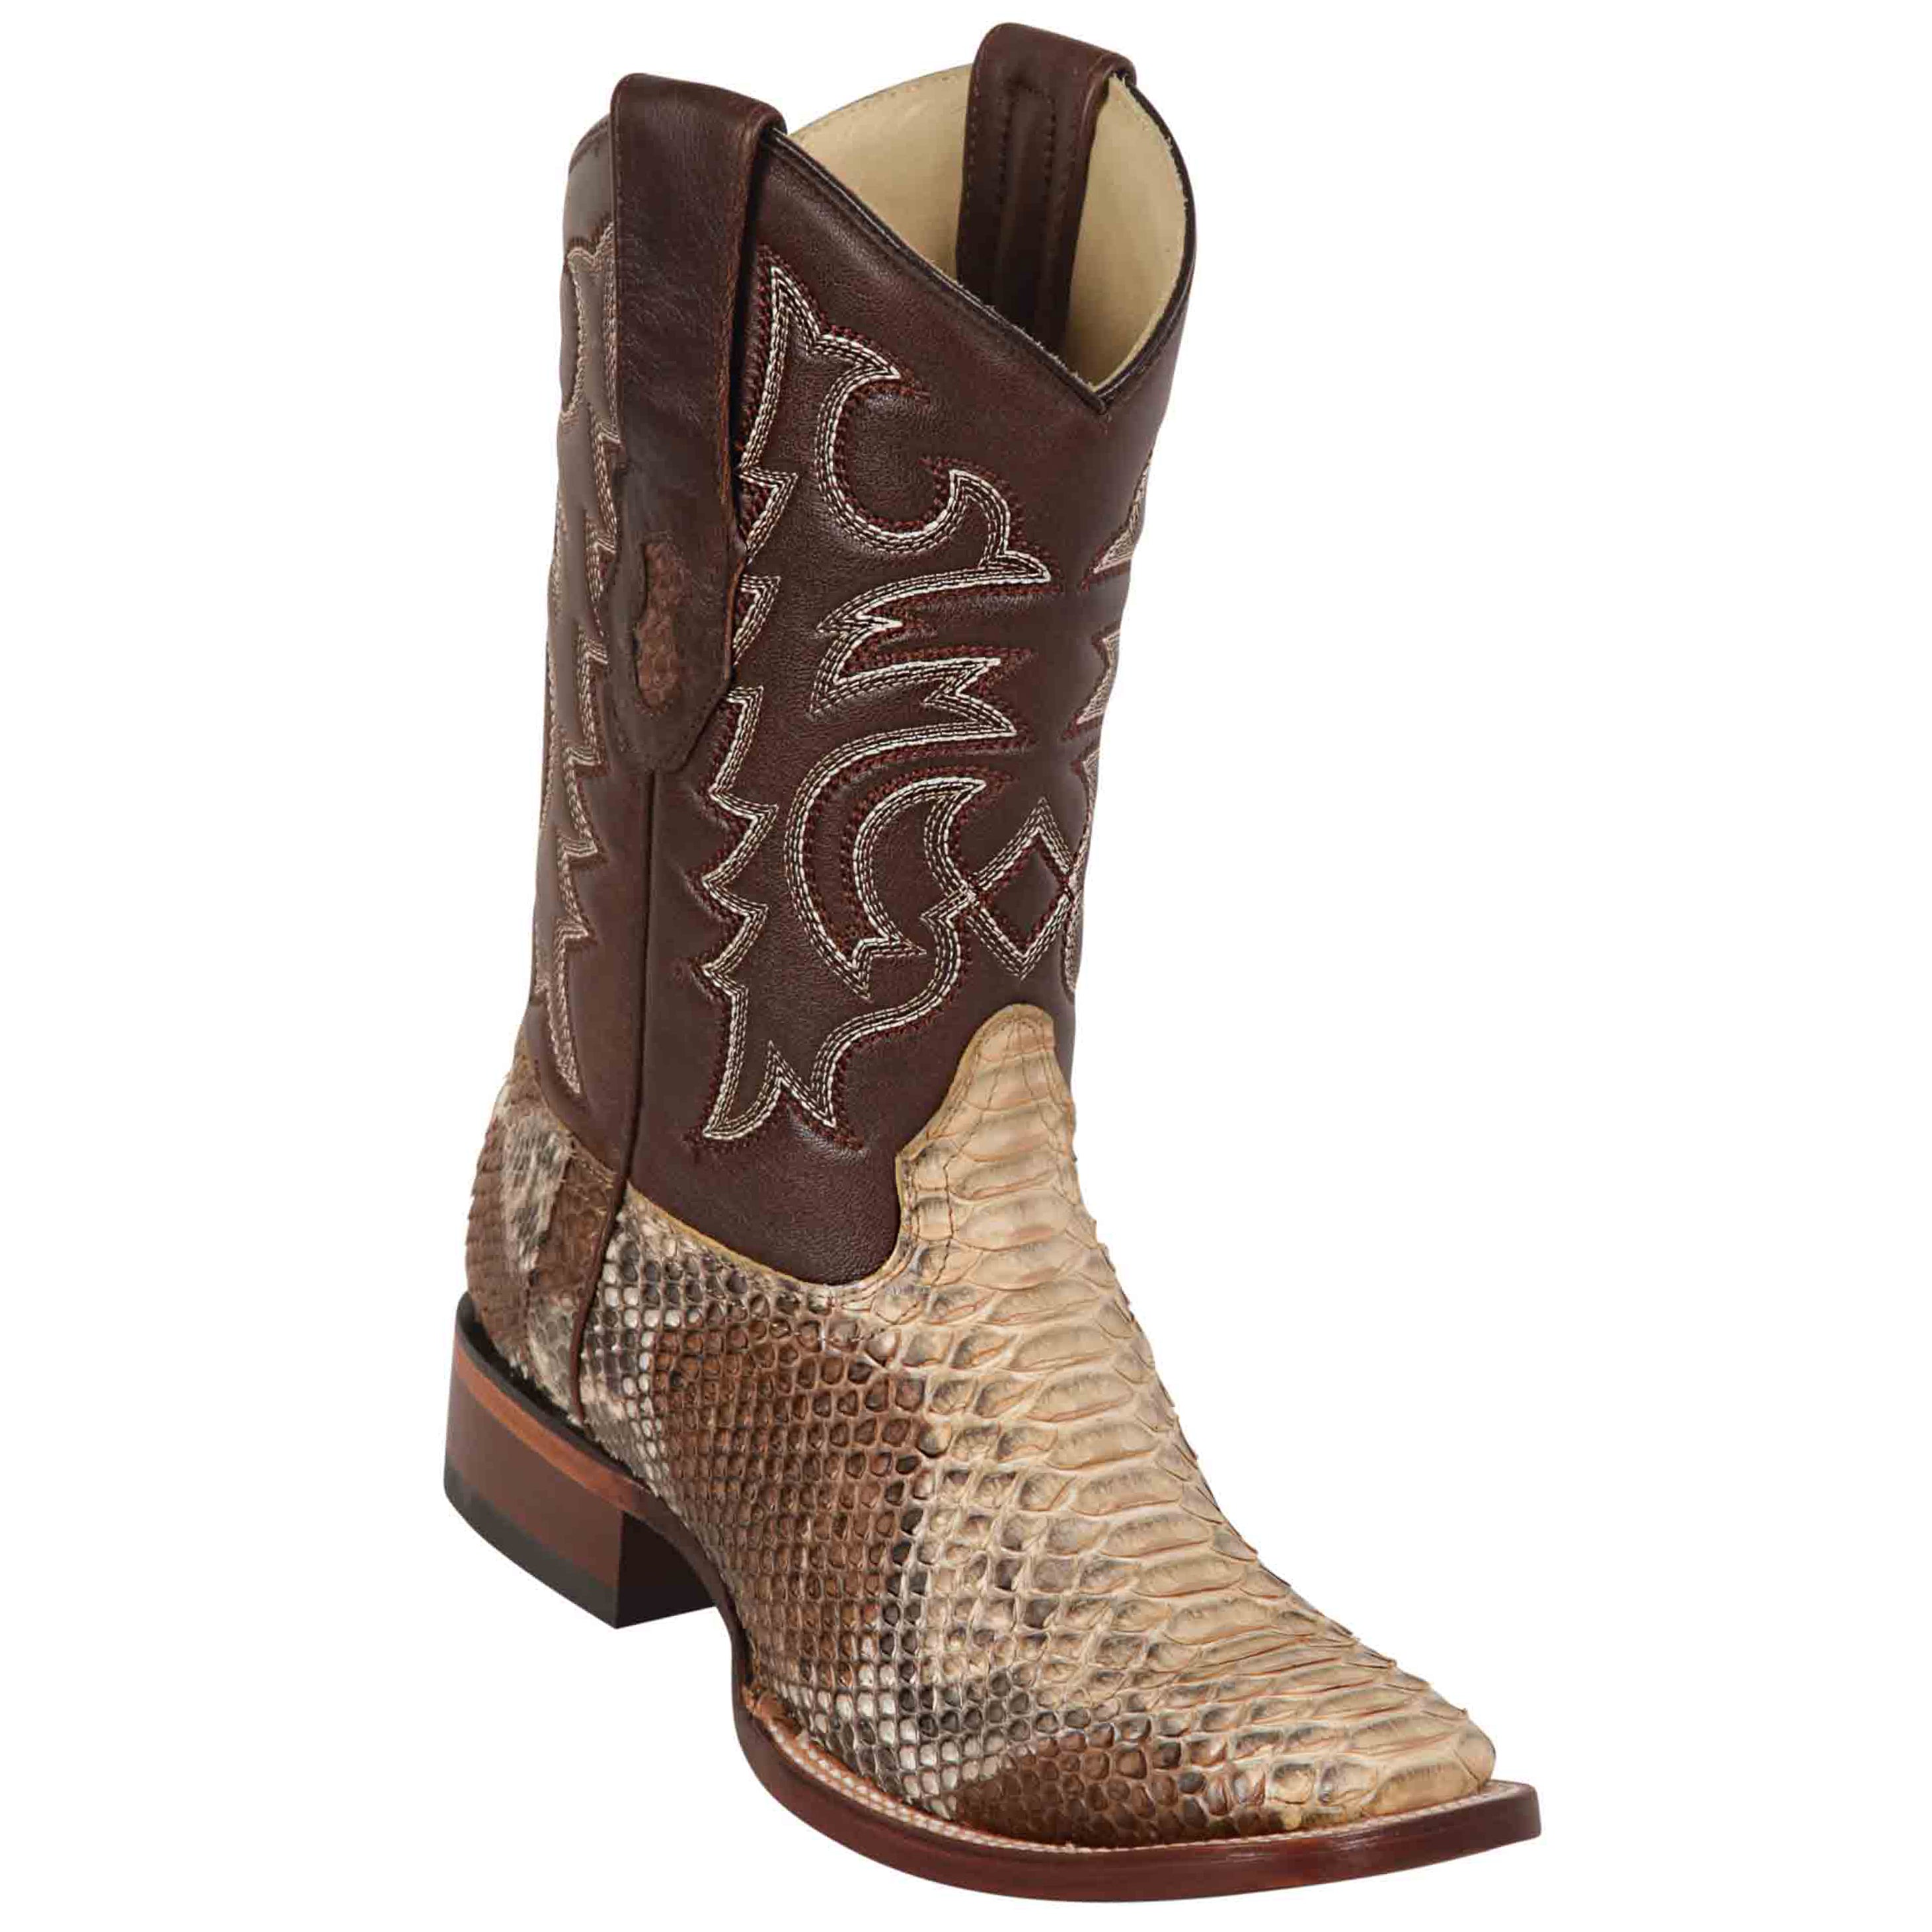 Mens Square Toe Snakeskin Boots - Los Altos Boots